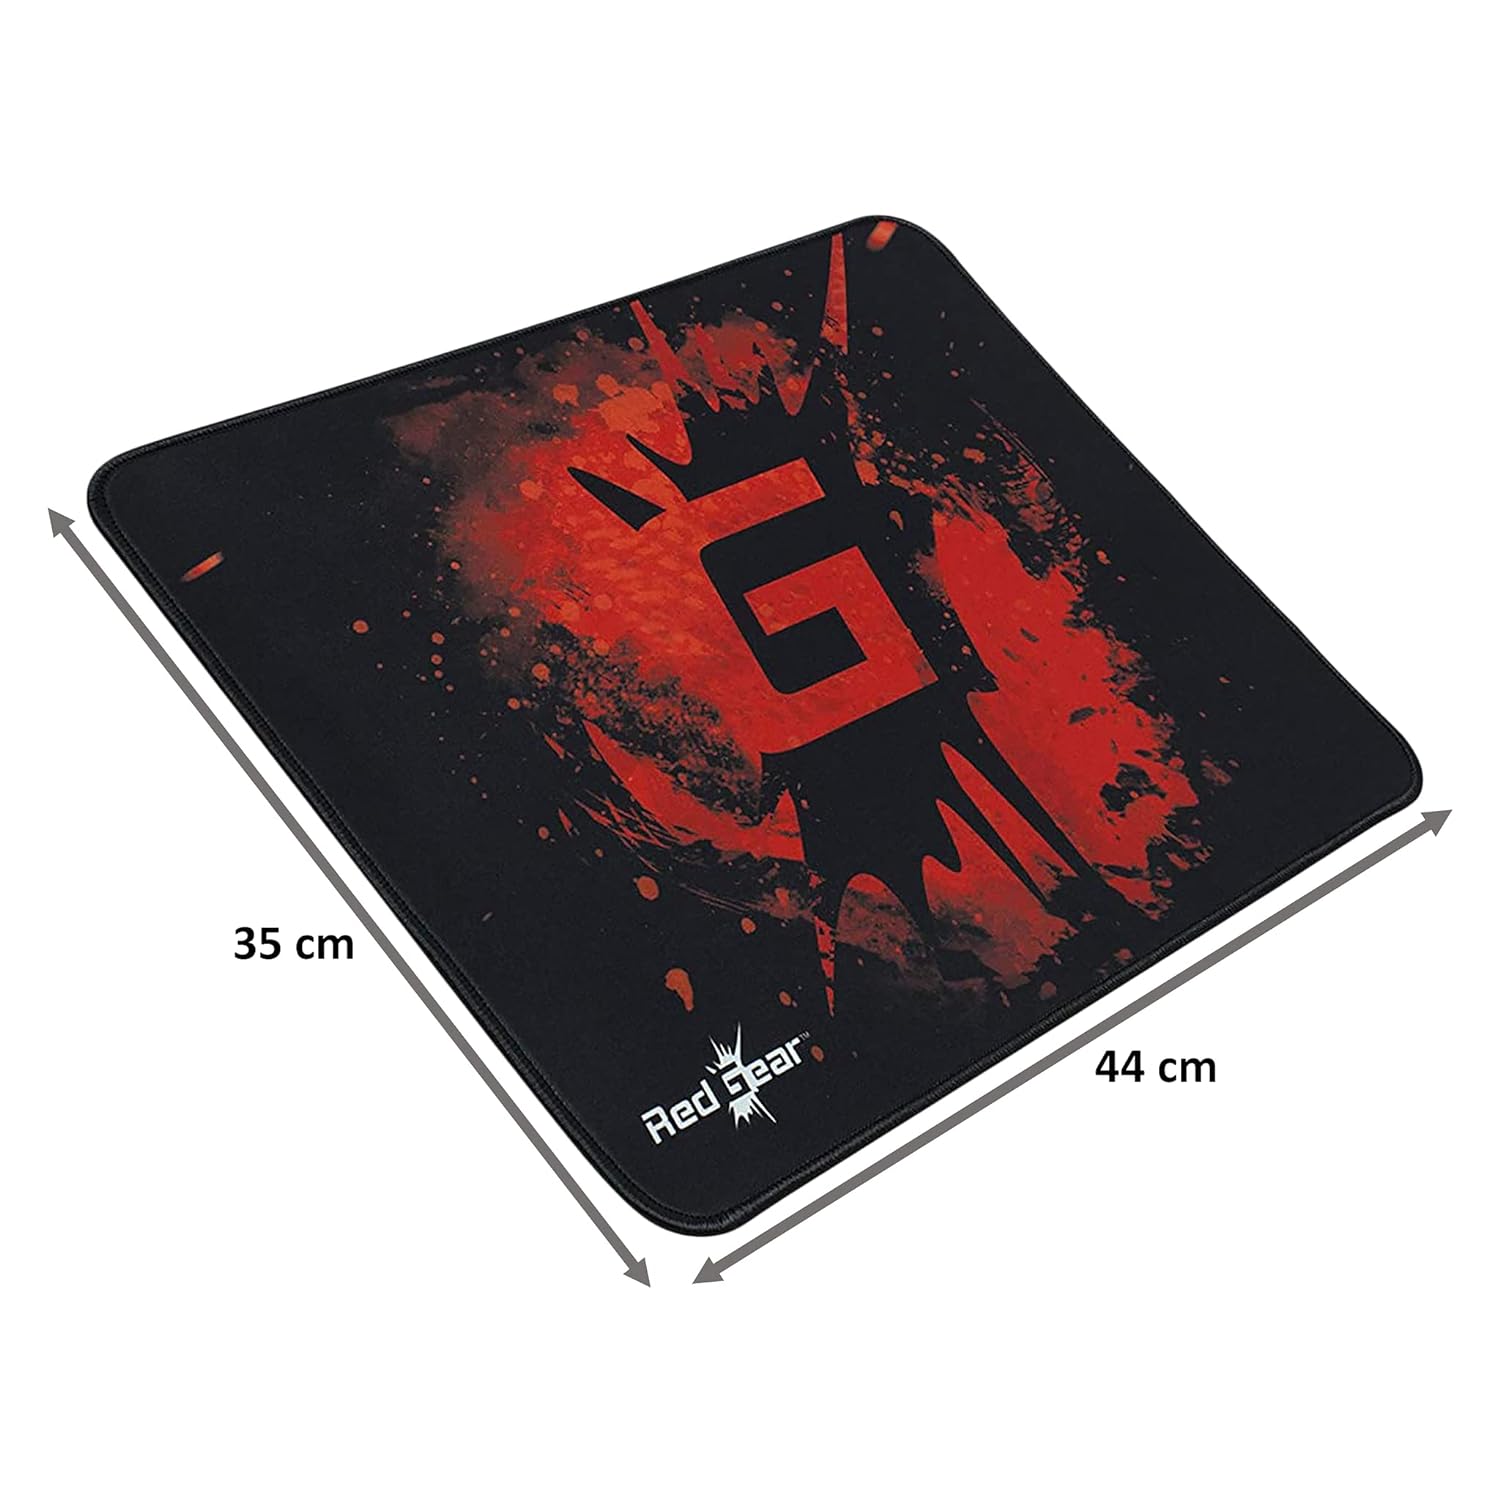 Redgear MP44 Small Speed-Type Gaming Mousepad